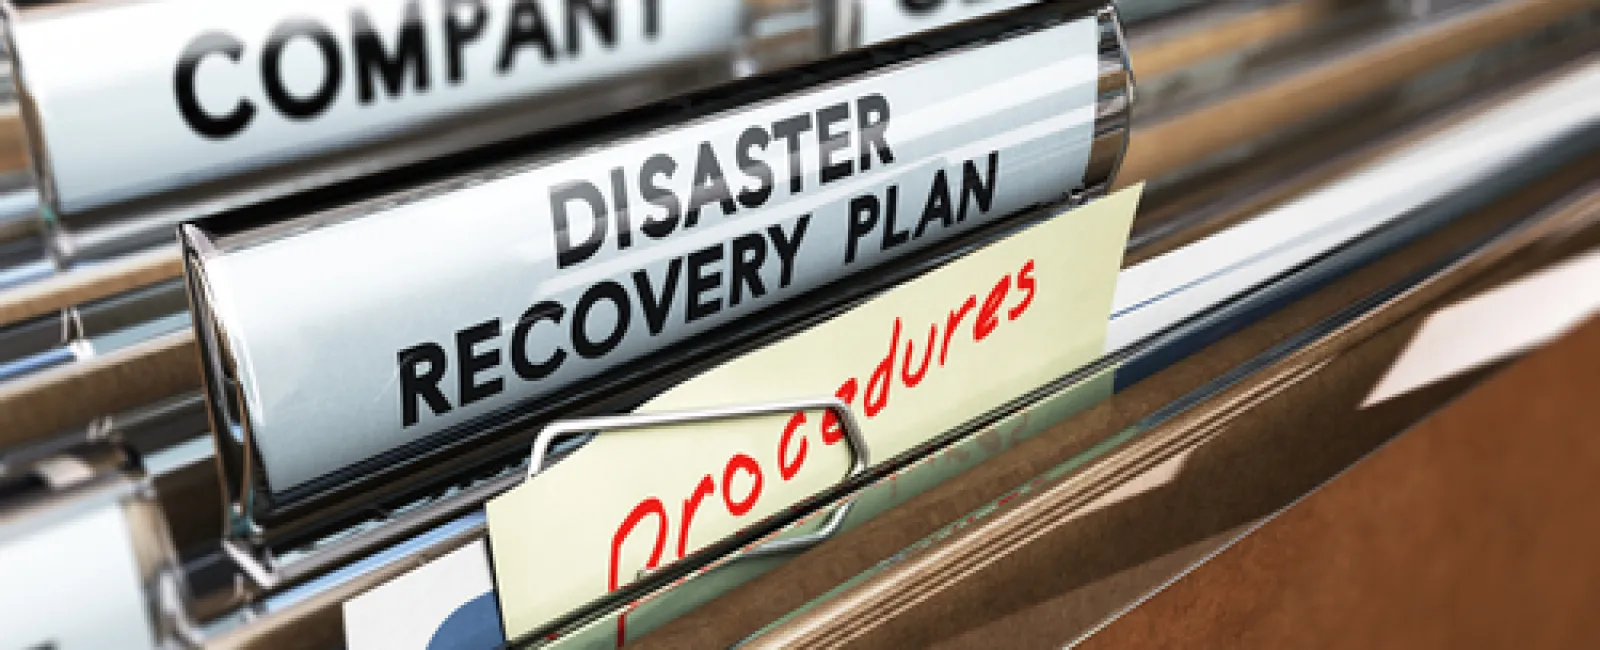 Who is responsible for our Disaster Recovery Plan?